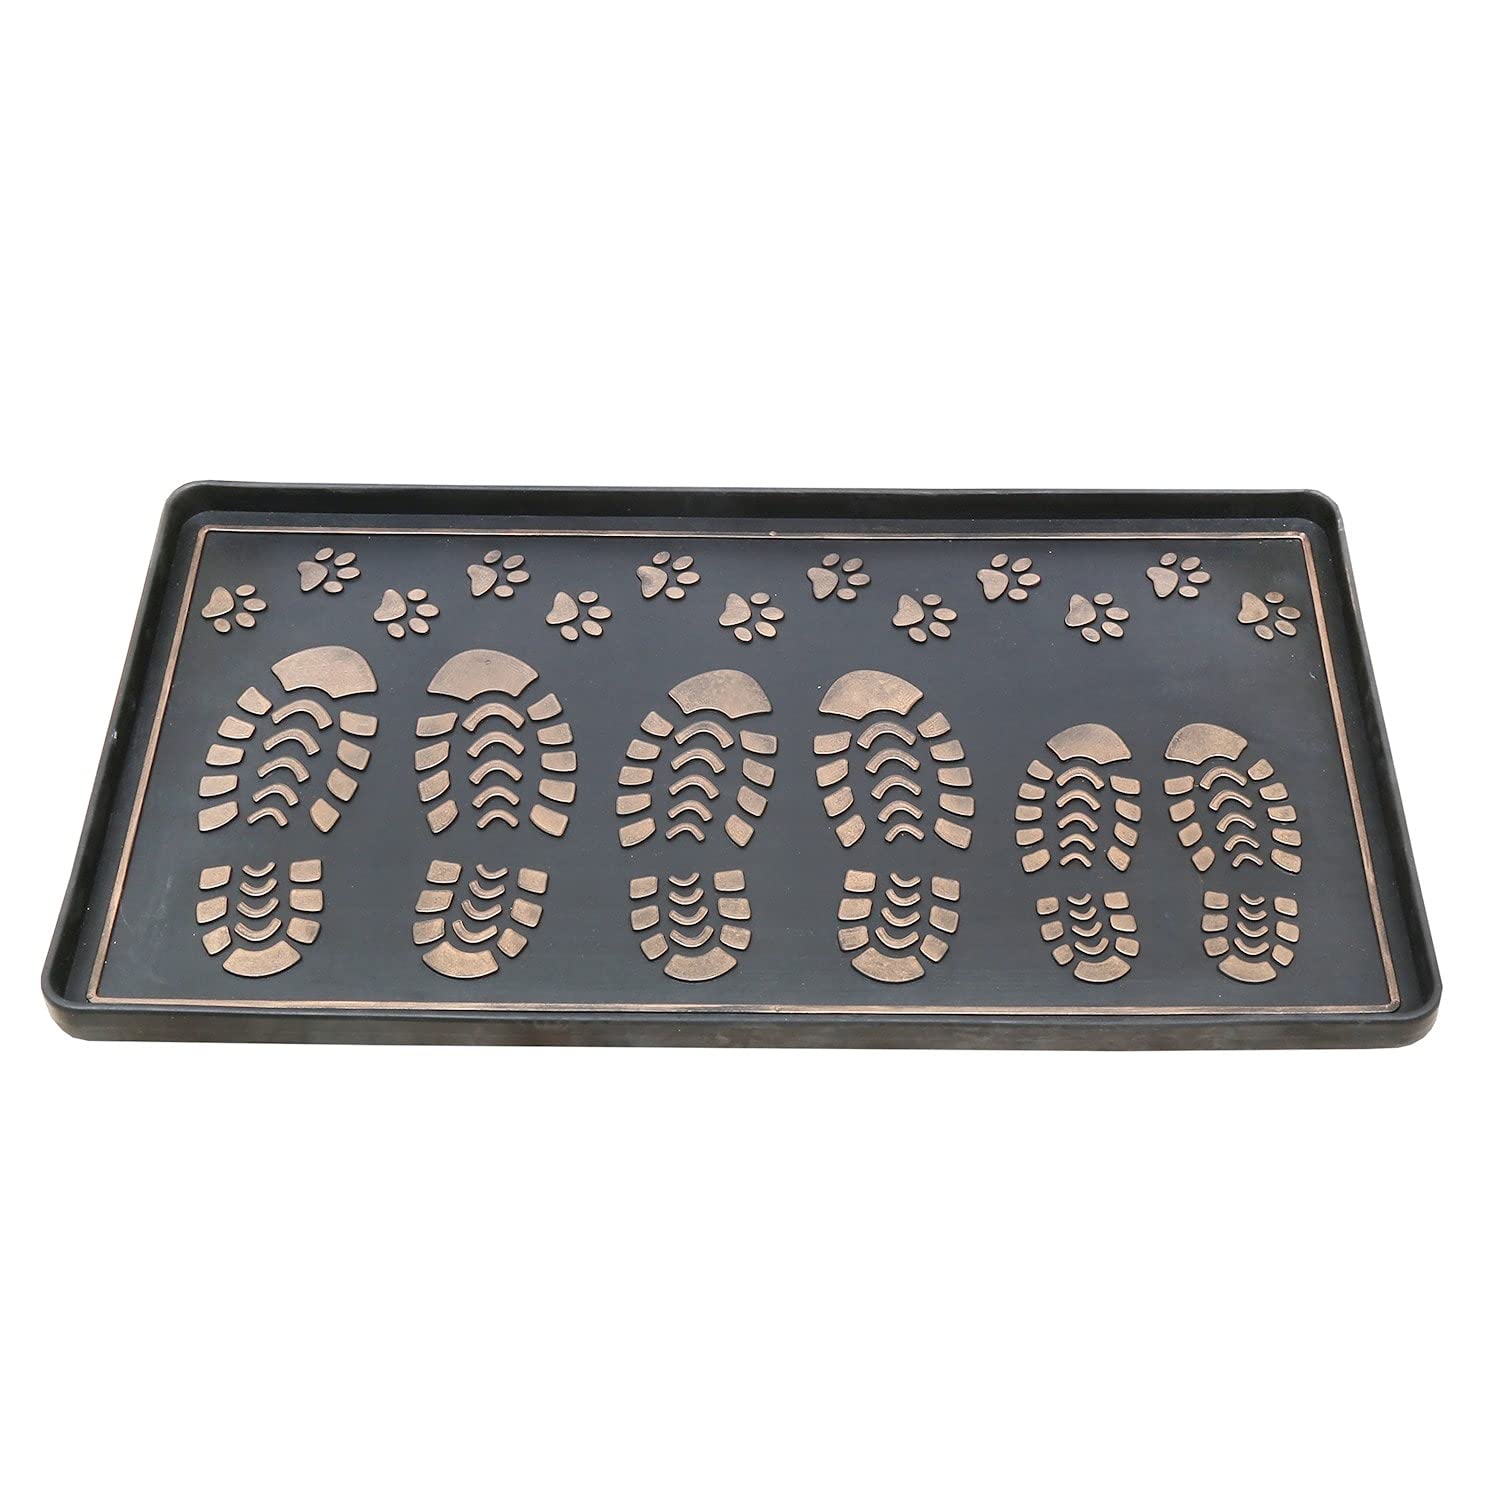 ART & ARTIFACT Rubber Boot Tray Wet Shoe Tray for Entryway Indoor Outdoor Rubber Mat Extra Large Boot Tray 32" x 16", Black, Damask